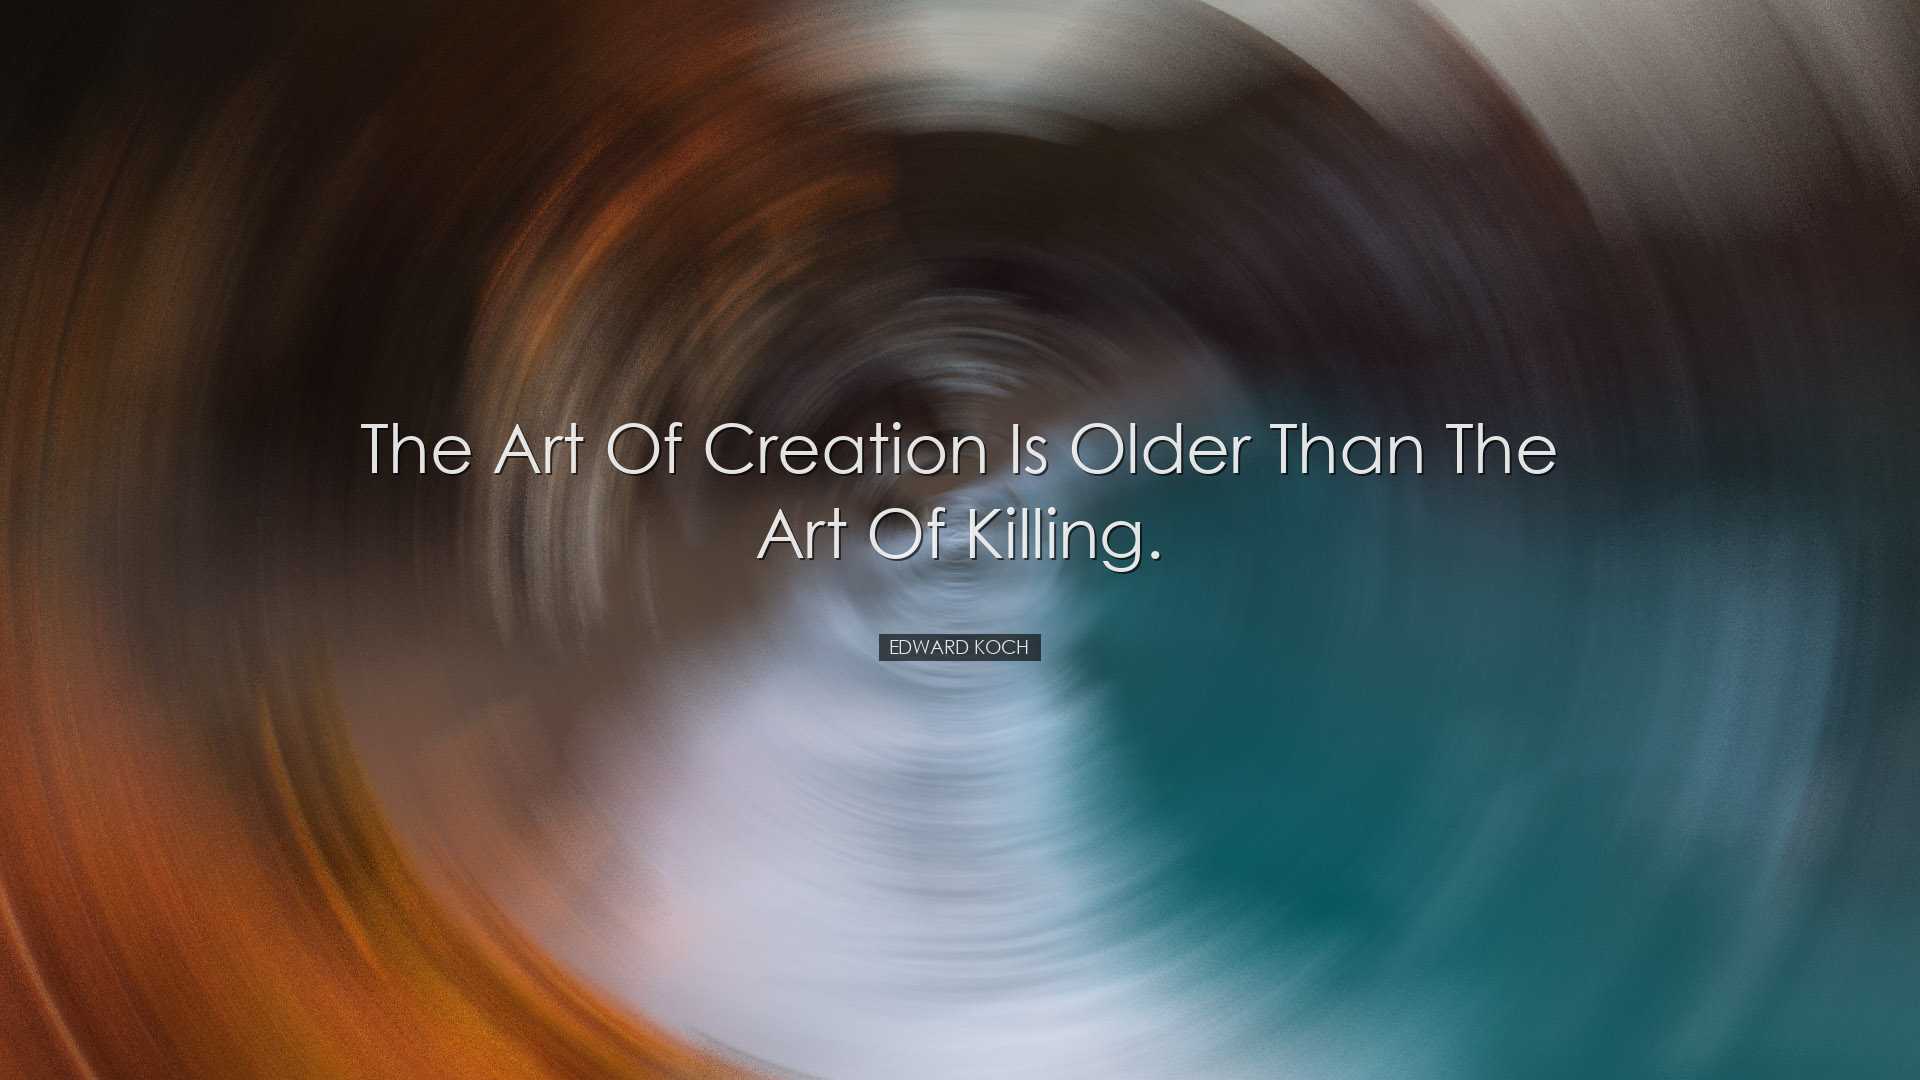 The art of creation is older than the art of killing. - Edward Koc